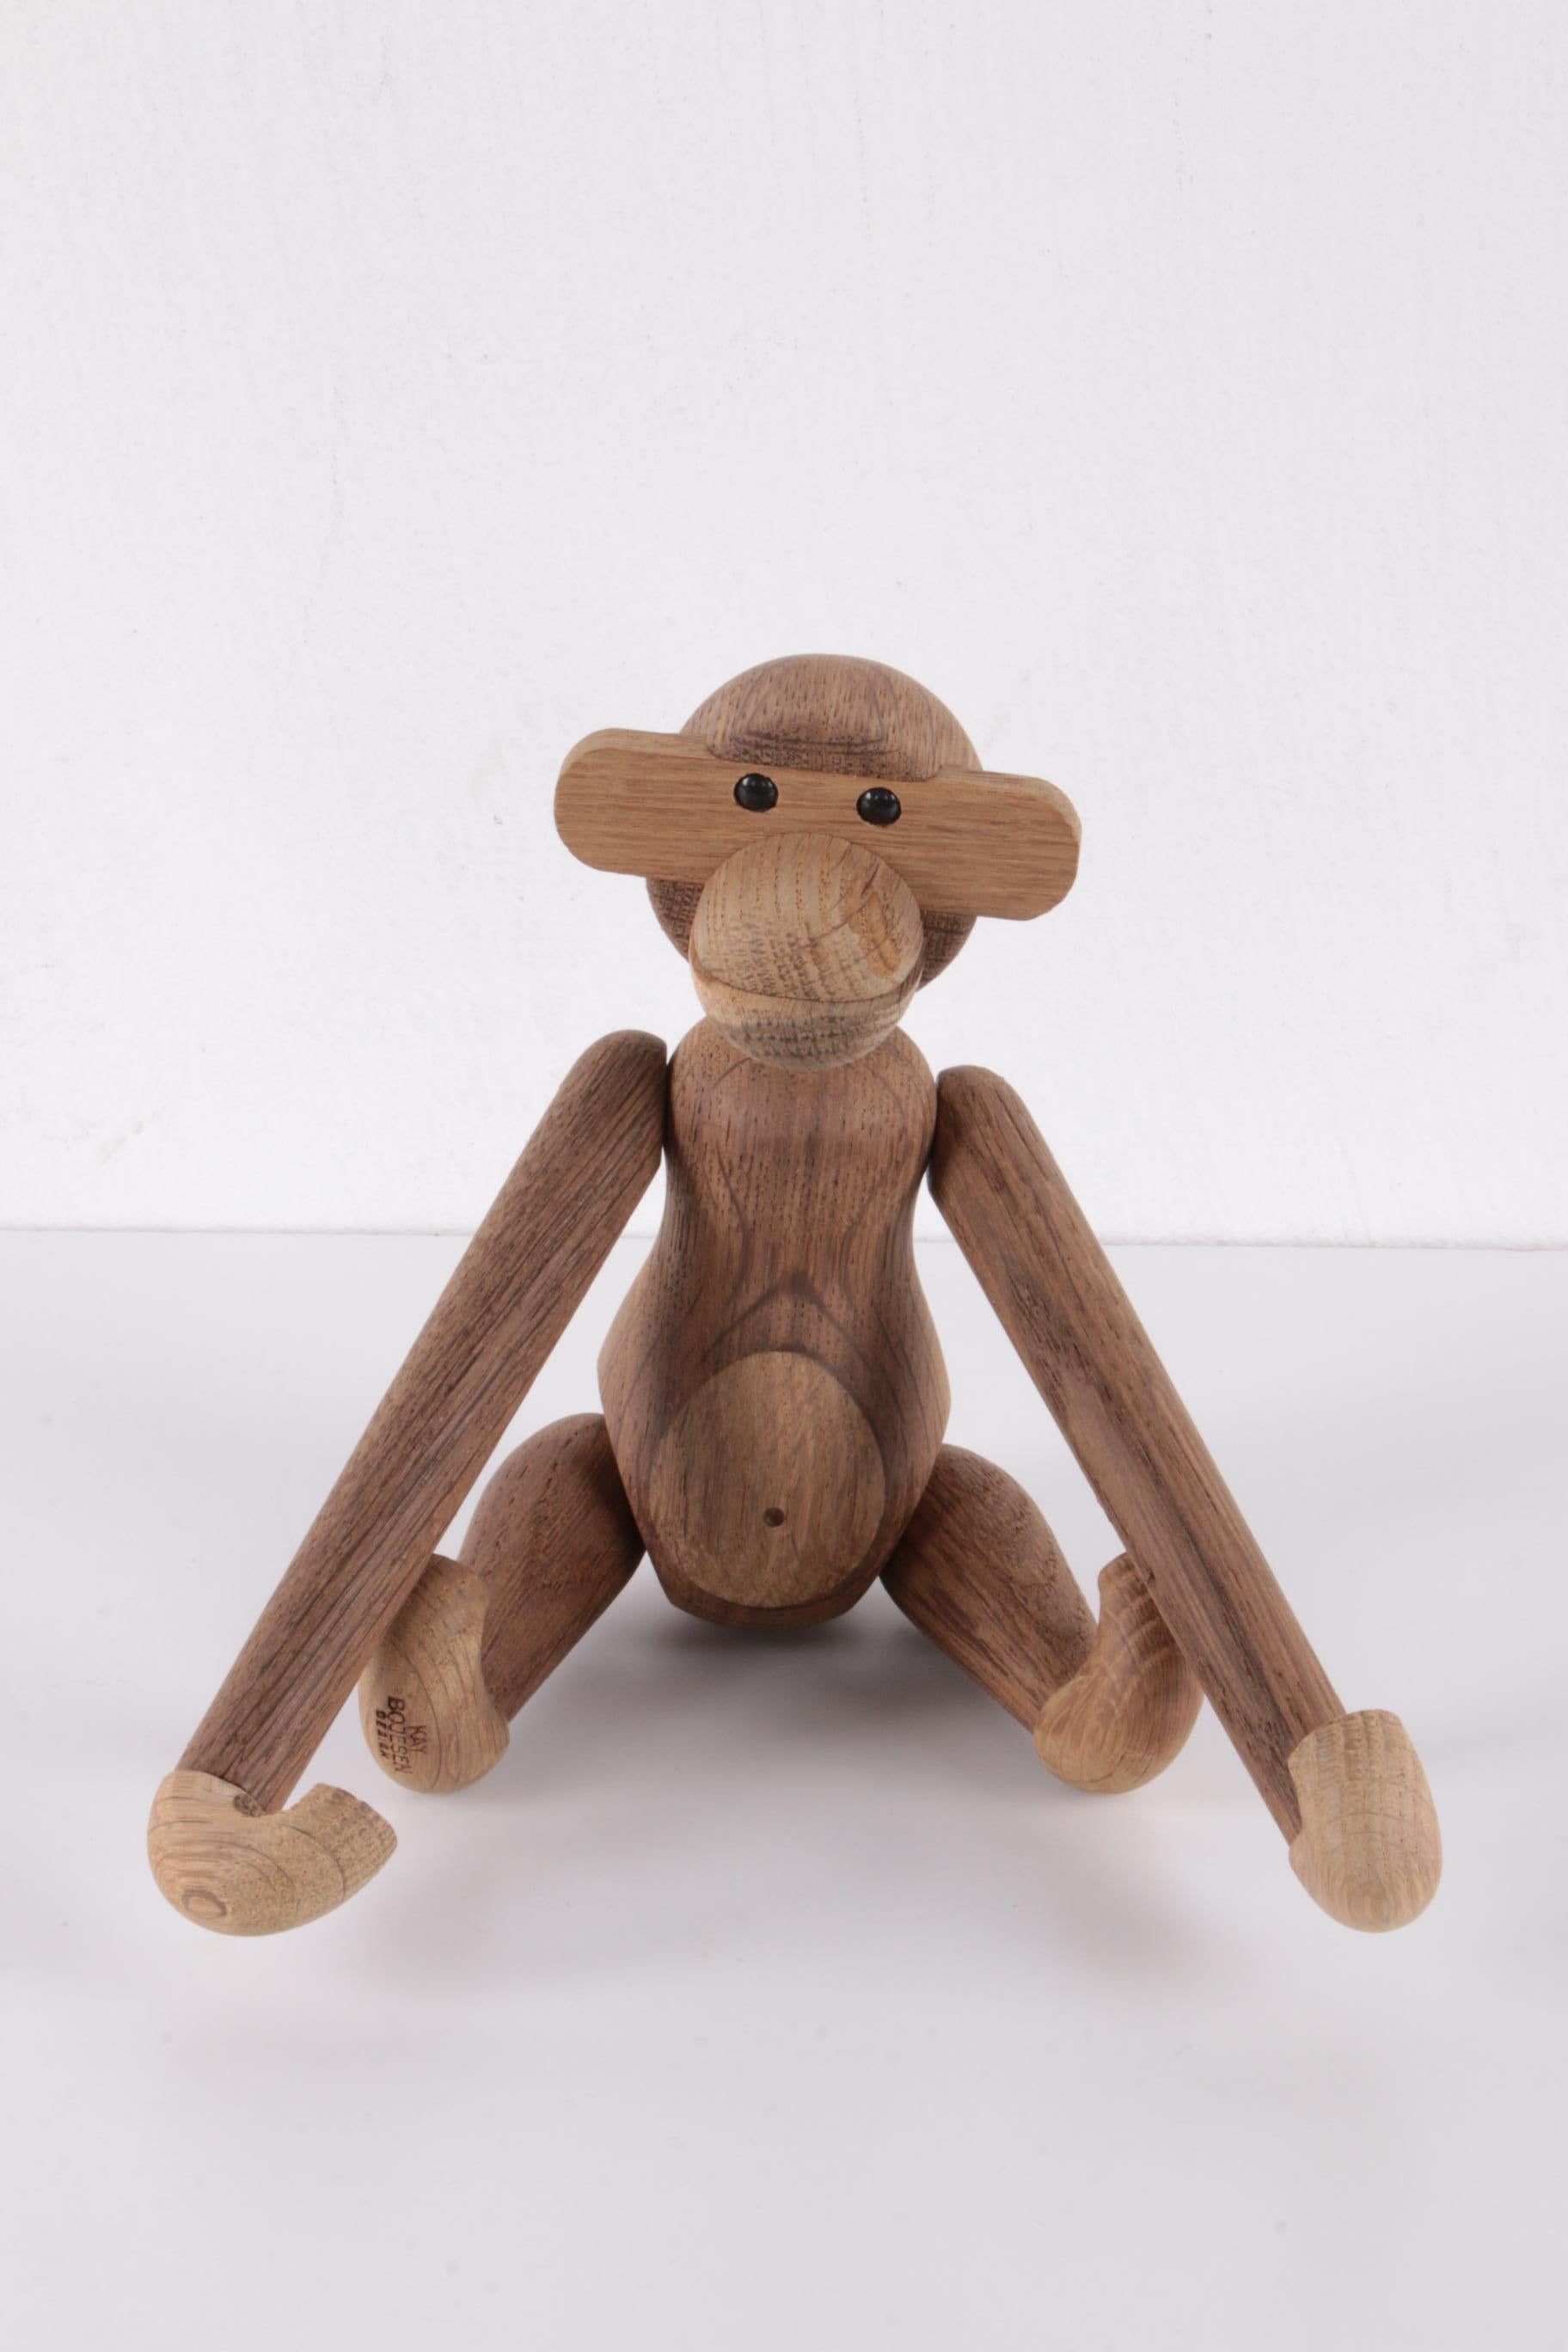 Original Kay Bojesen Monkey Monkey size small


Kay Bojesens Monkey was born in Denmark in 1951 and is made of teak.

This monkey is size small when we put the arms up 28 cm in total.

From the head to the feet it is 20 cm. We pack this